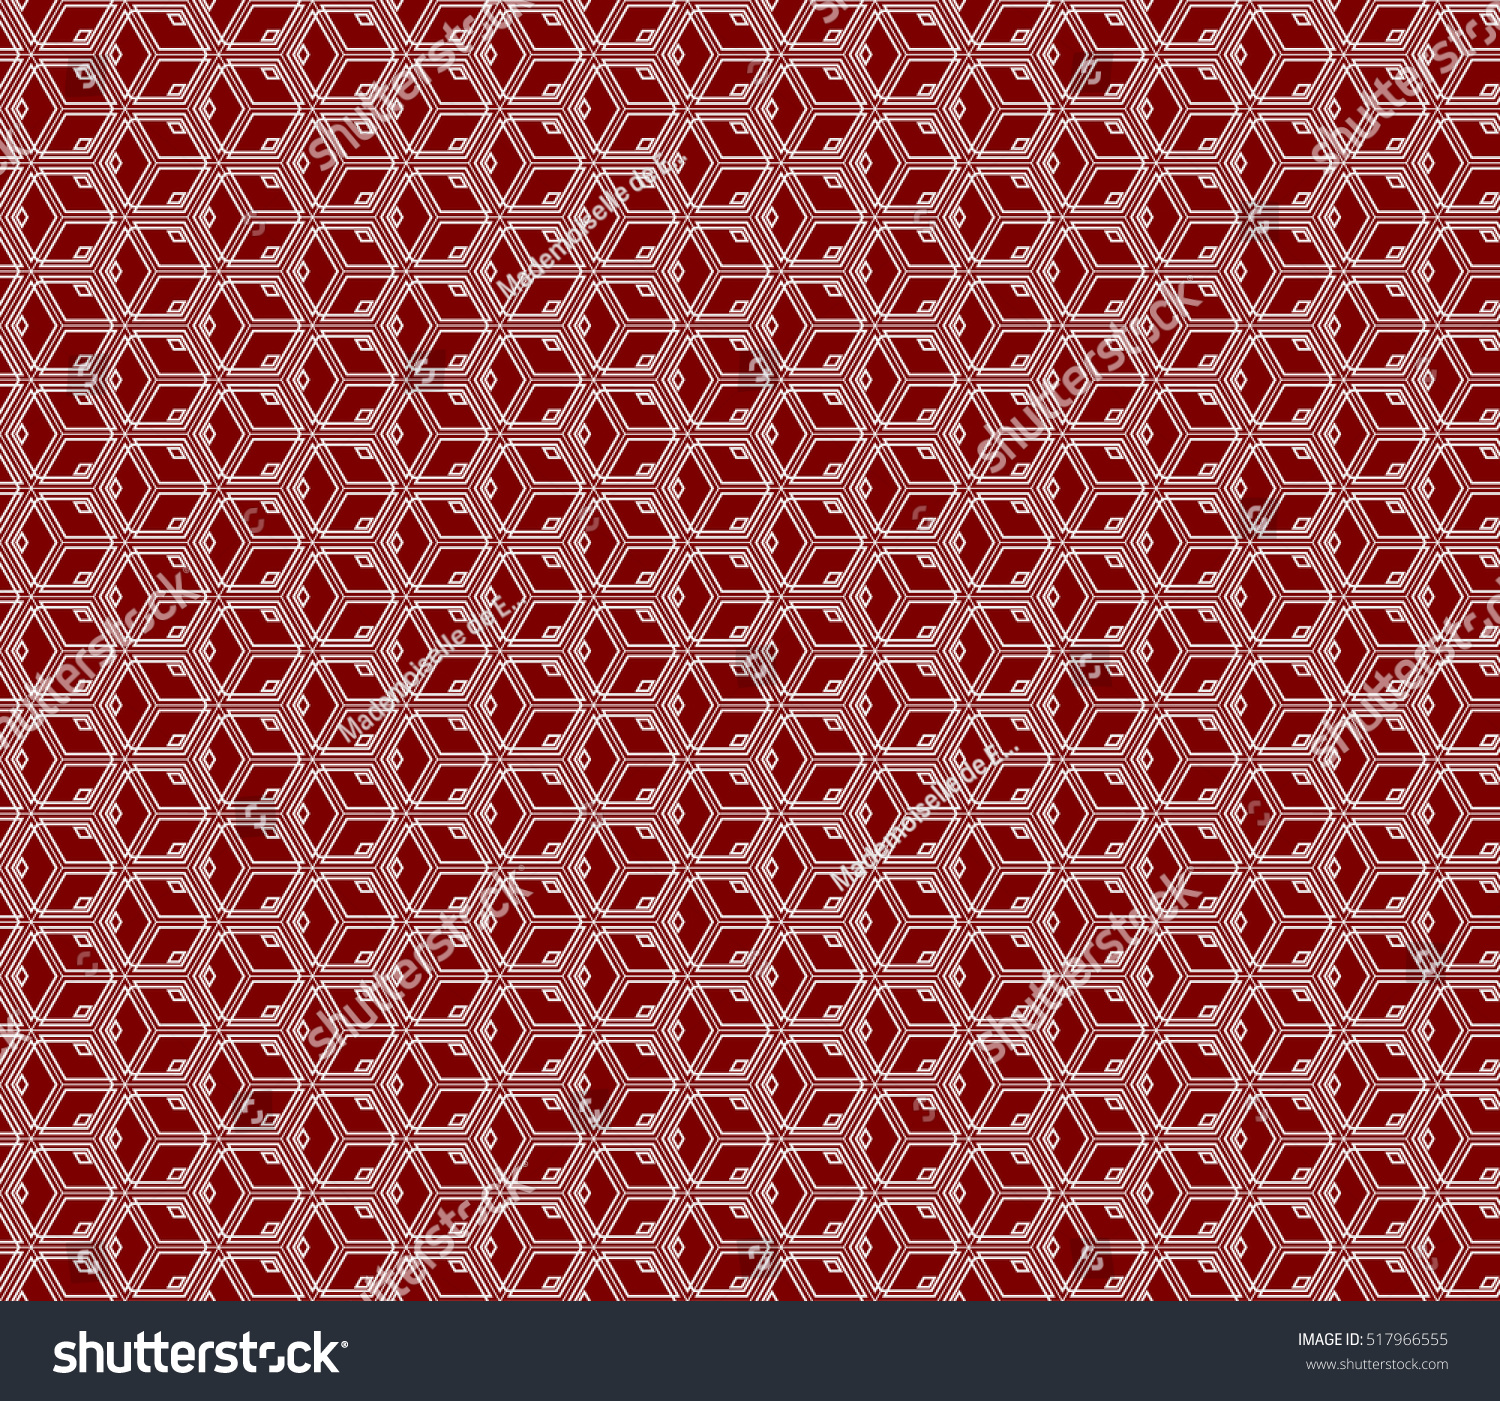 Red Cube Seamless Texture Illusion Vector Stock Vector (Royalty Free ...